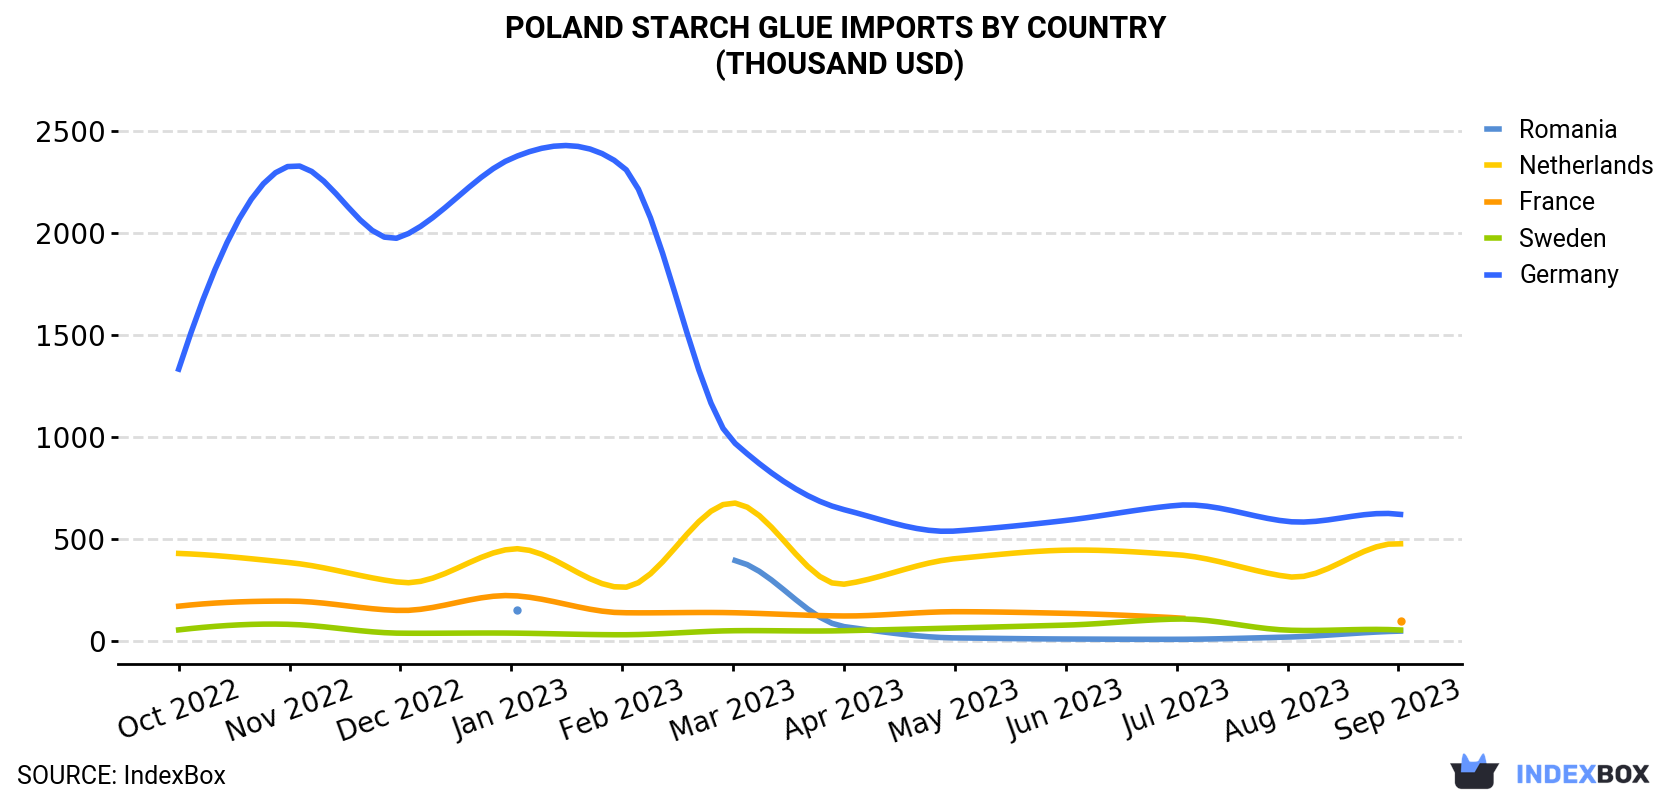 Poland Starch Glue Imports By Country (Thousand USD)